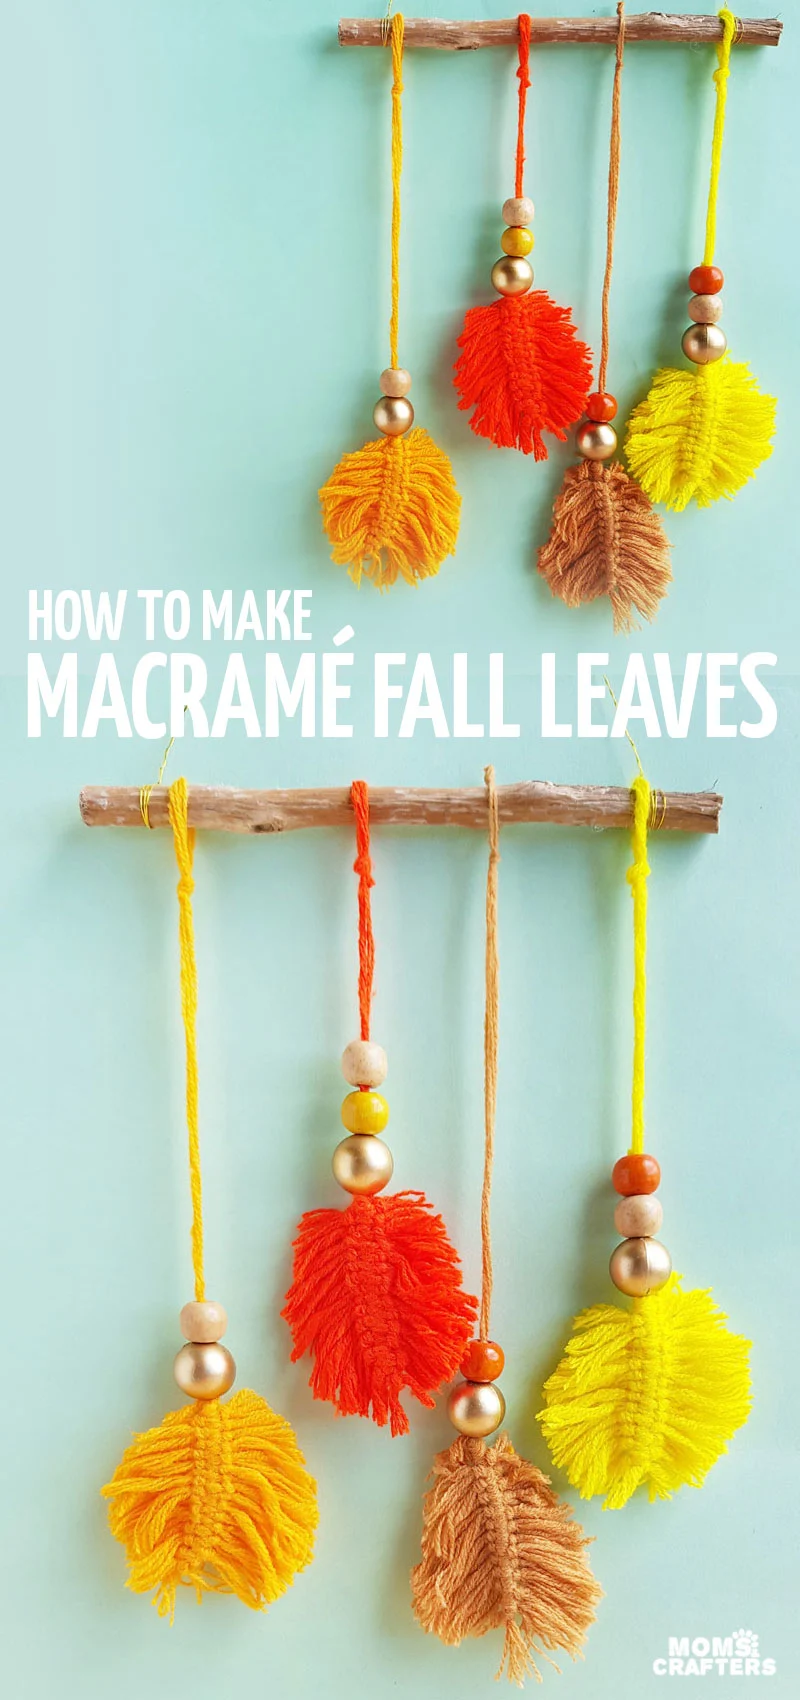 Learn how to make macrame fall leaves using just a few simple steps, and then turn it into stunning fall DIY decor! This gorgeous DIY easy macrame wall hanging tutorial for beginners will bring autumn hygge into your home